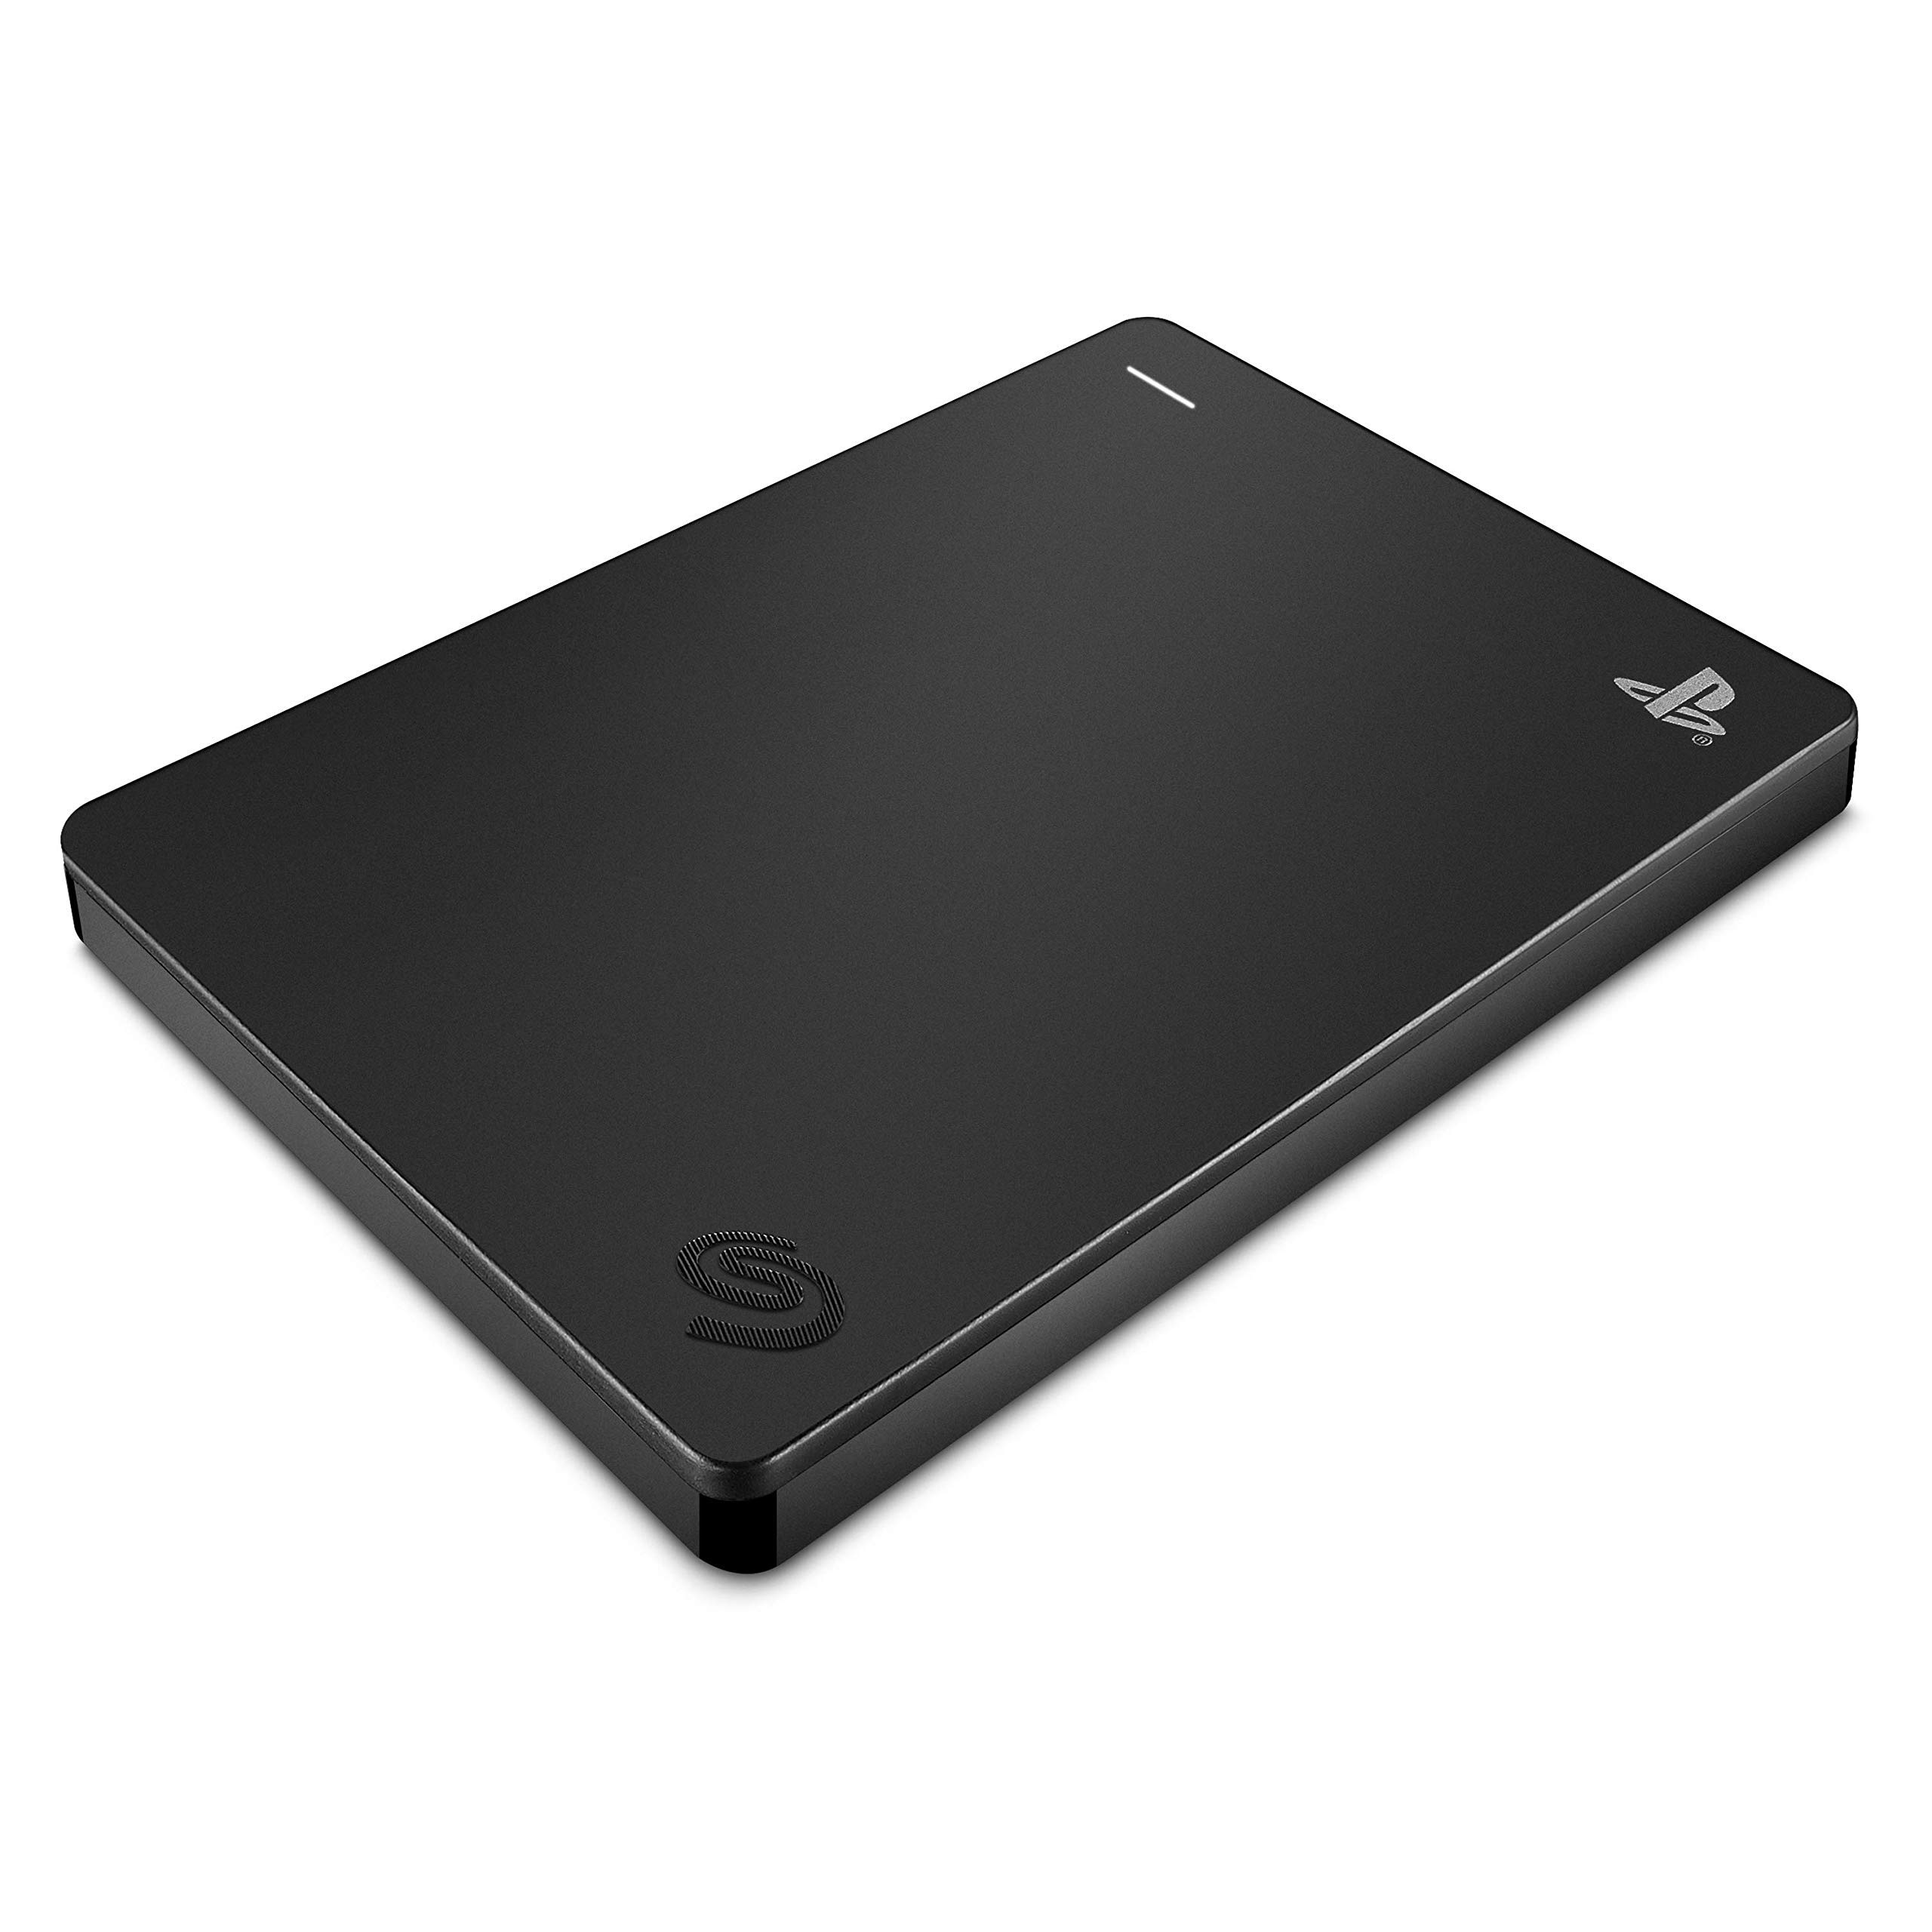 Seagate - Game Drive for PS4 Systems 2TB External USB 3.0